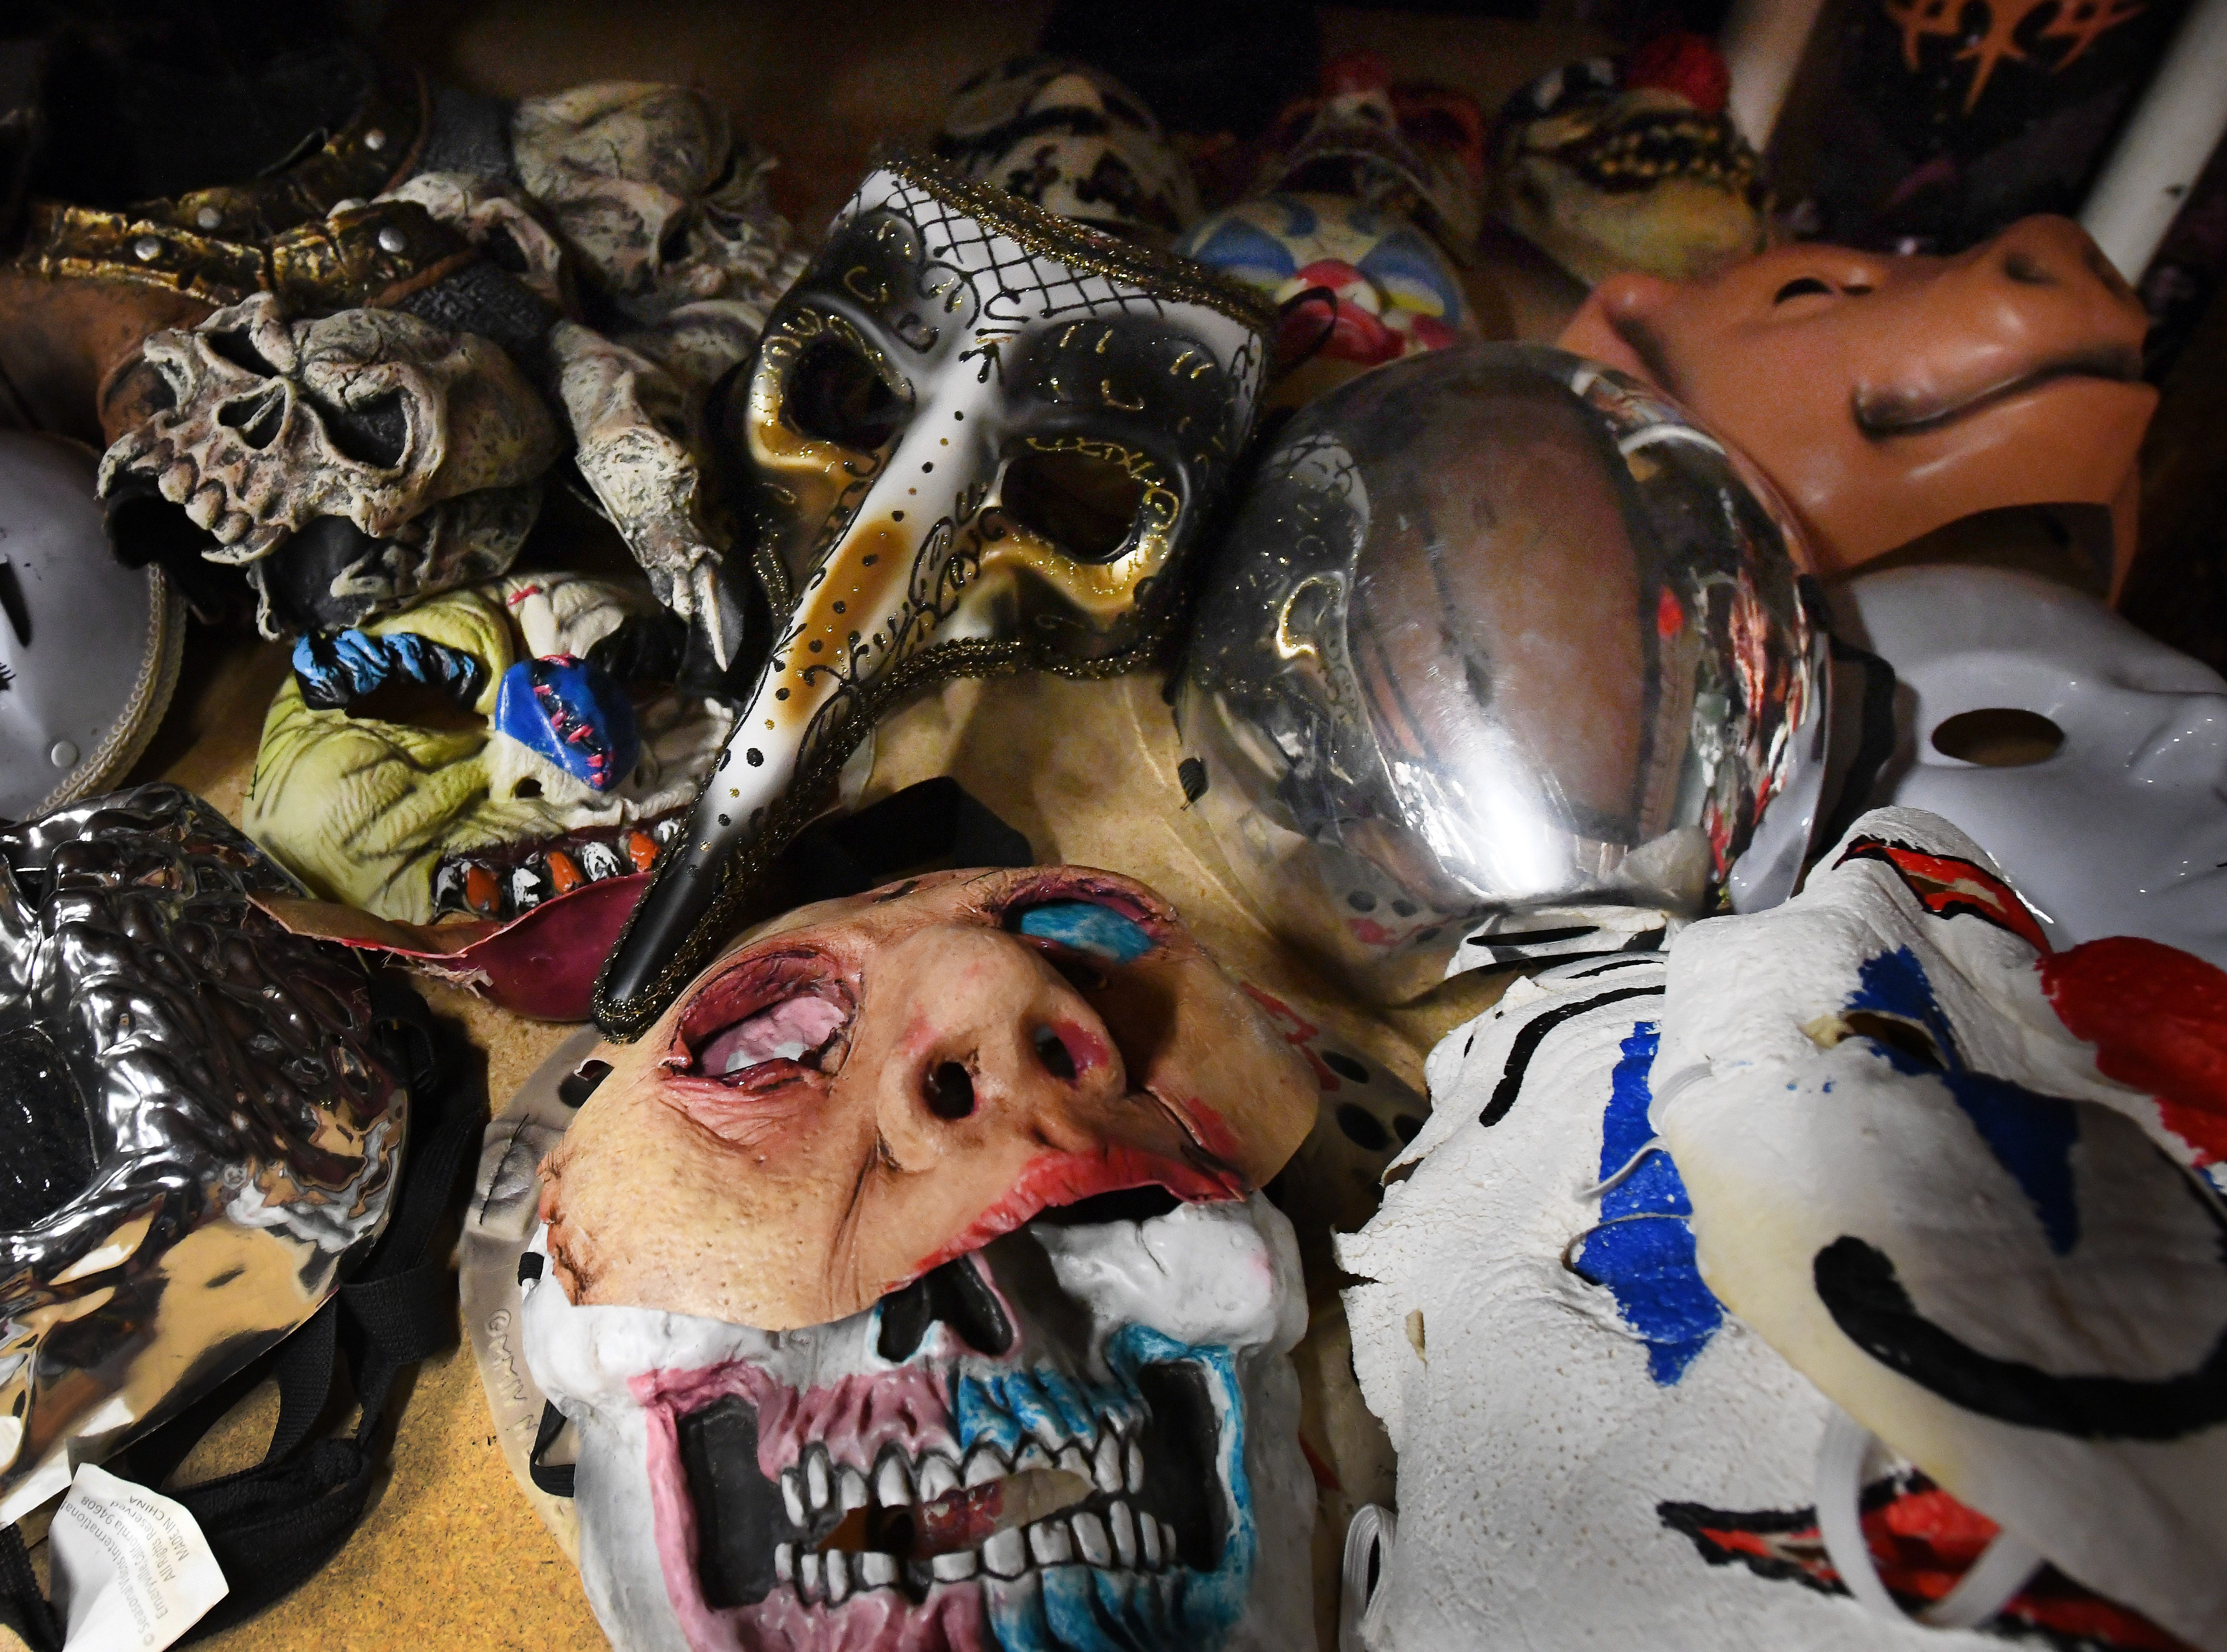 Violent J, aka Joseph Bruce of Insane Clown Posse, shows off costume storage where outfits and various paraphernalia is stored from their elaborate shows and tours.